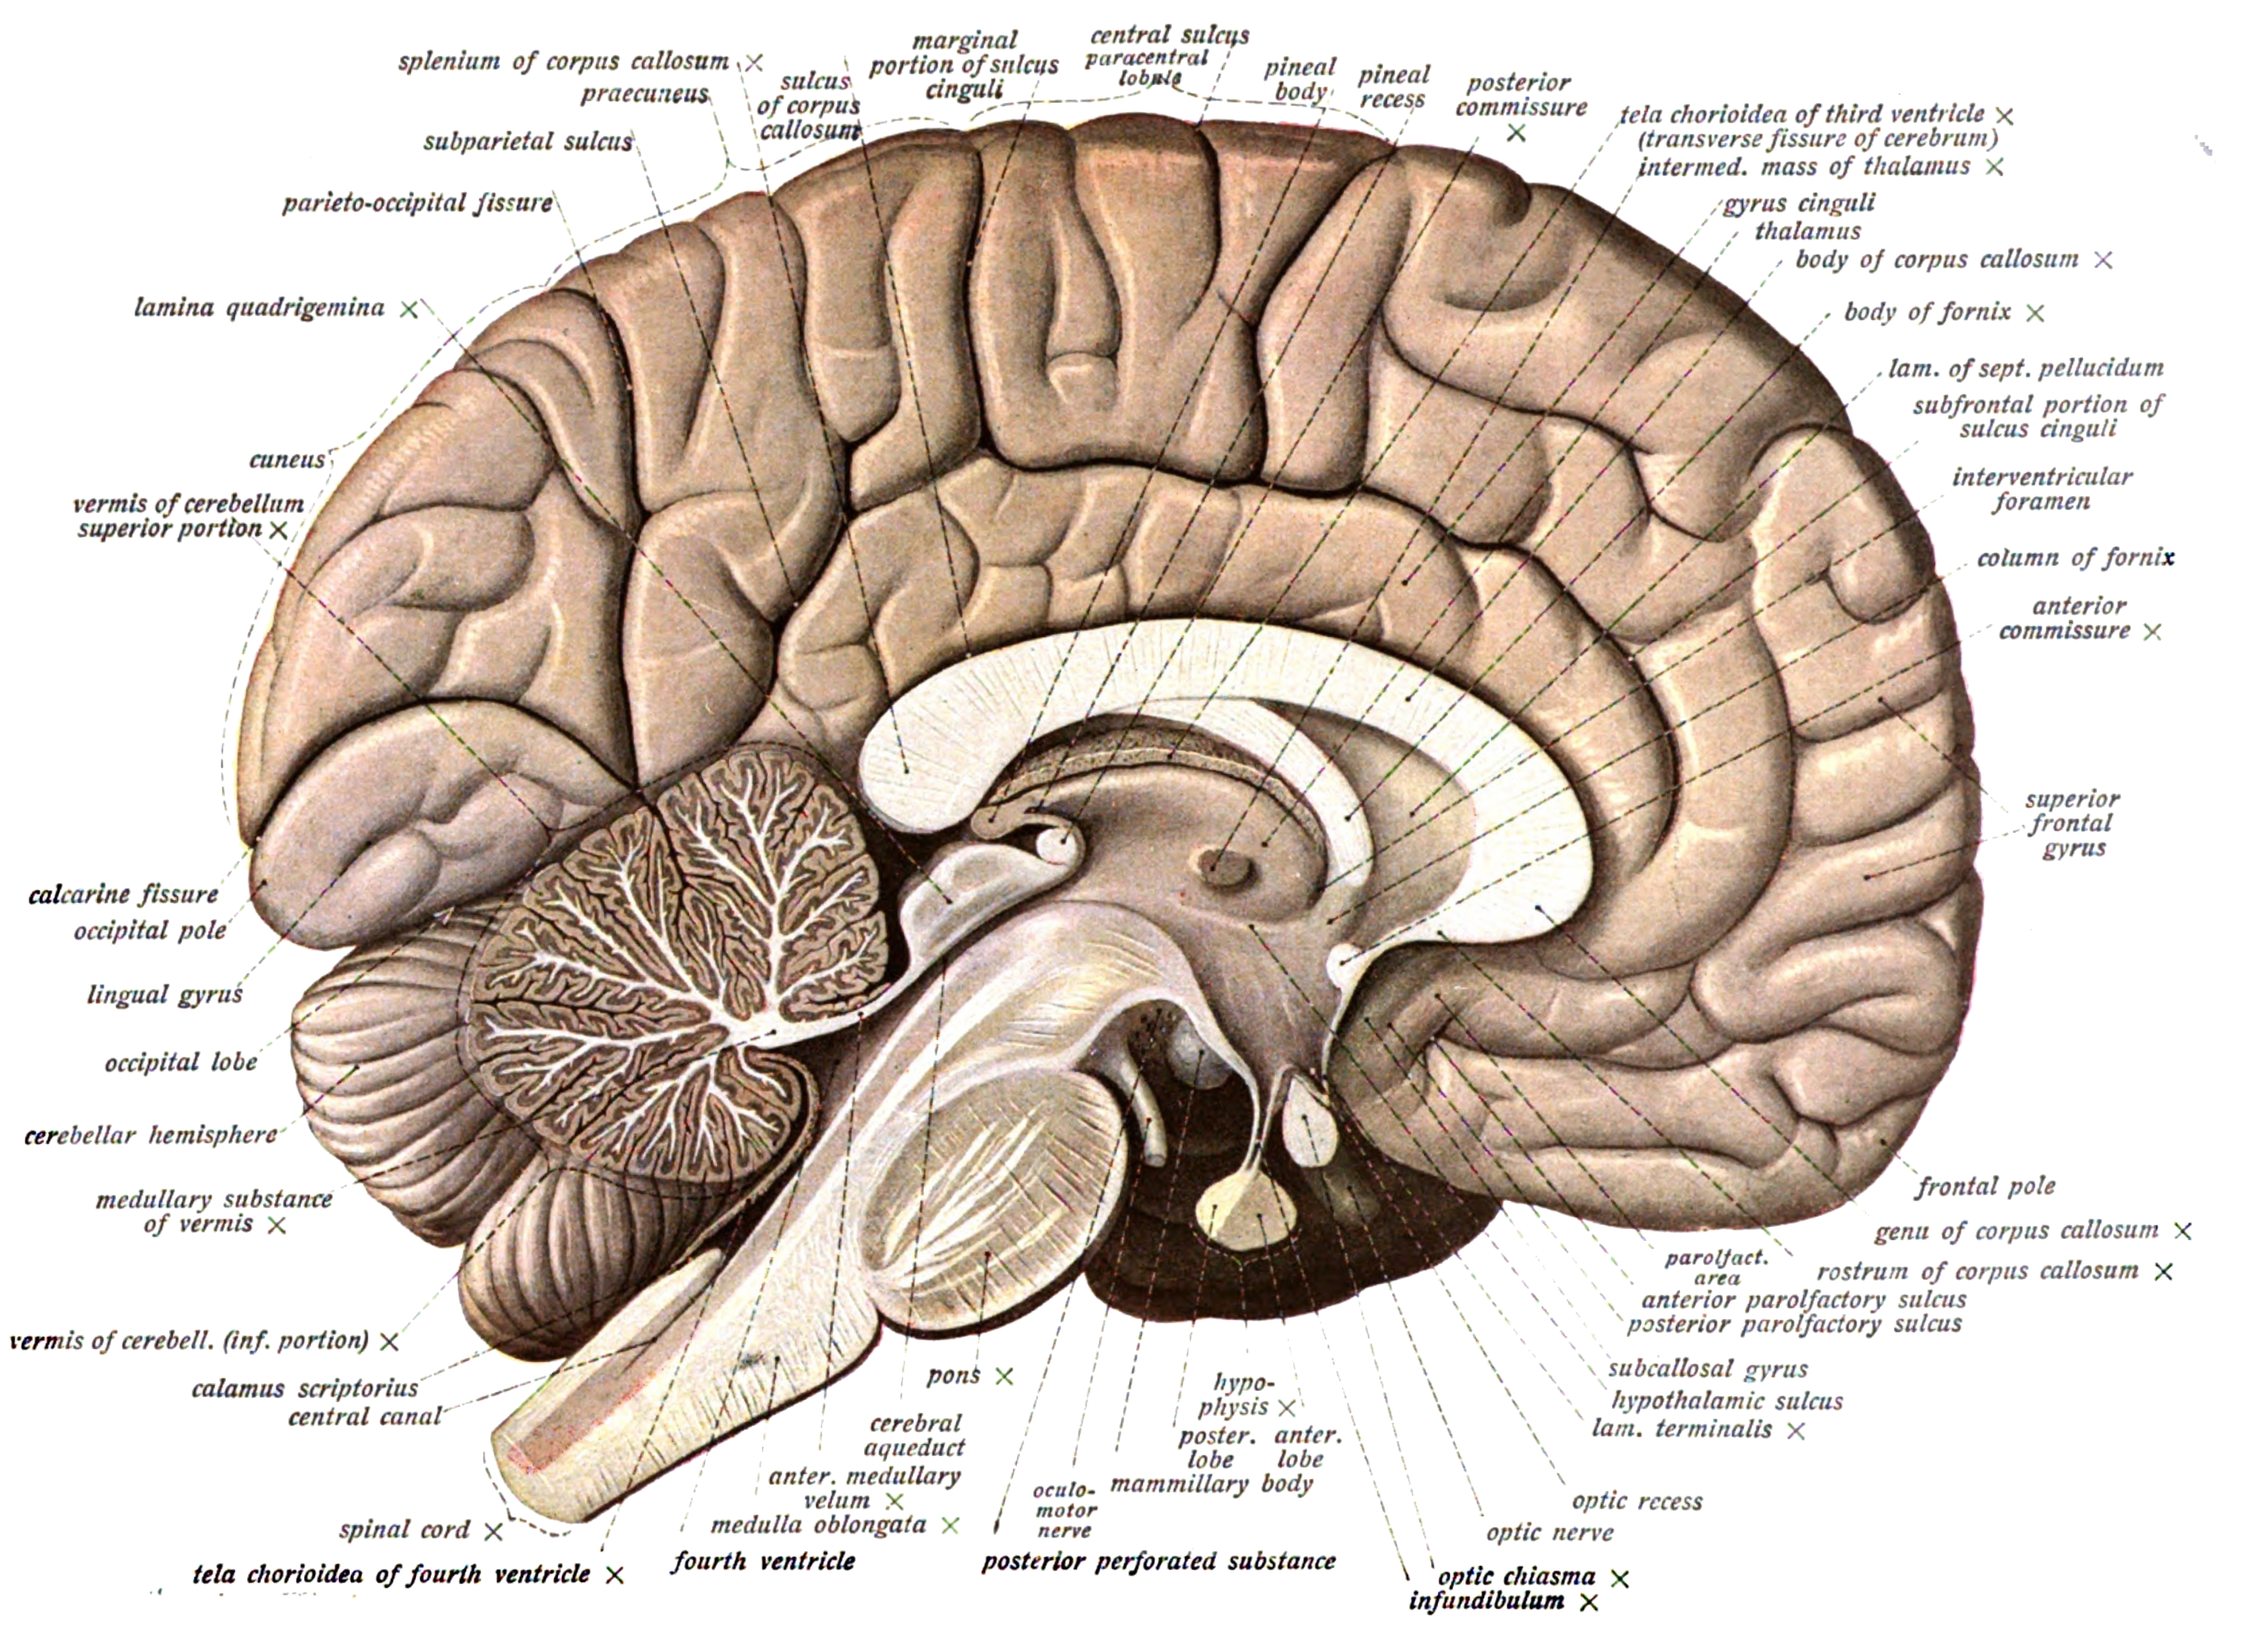 Human brain viewed through a mid-line incision. An anatomical illustration from Sobotta's Human Anatomy 1908